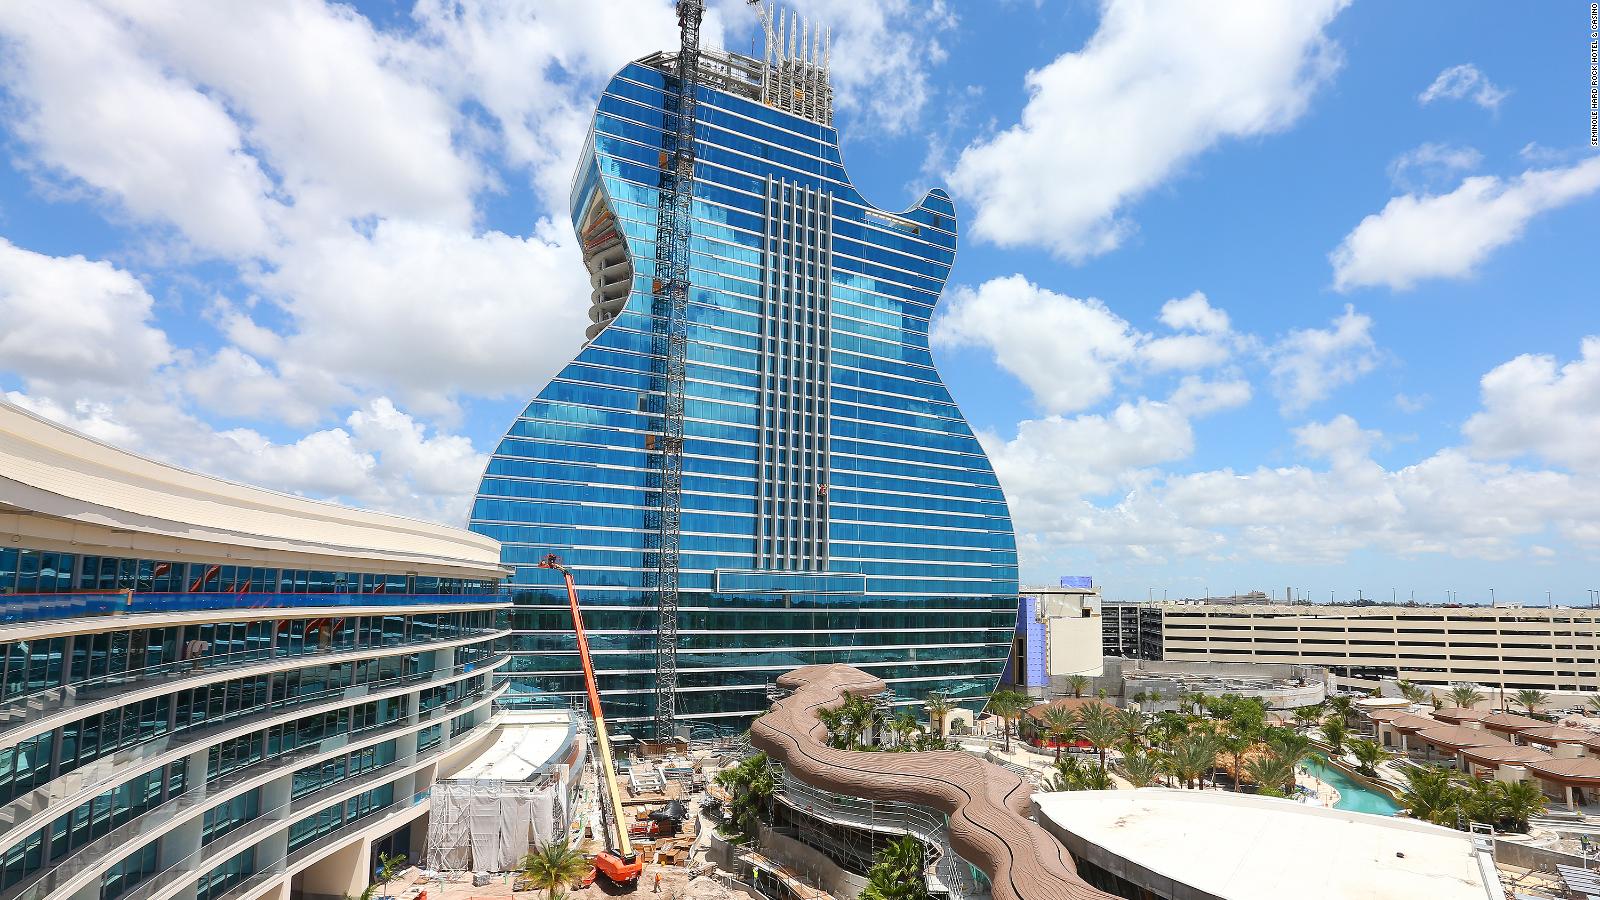 Hard Rock Sets Out To Change Casino Culture